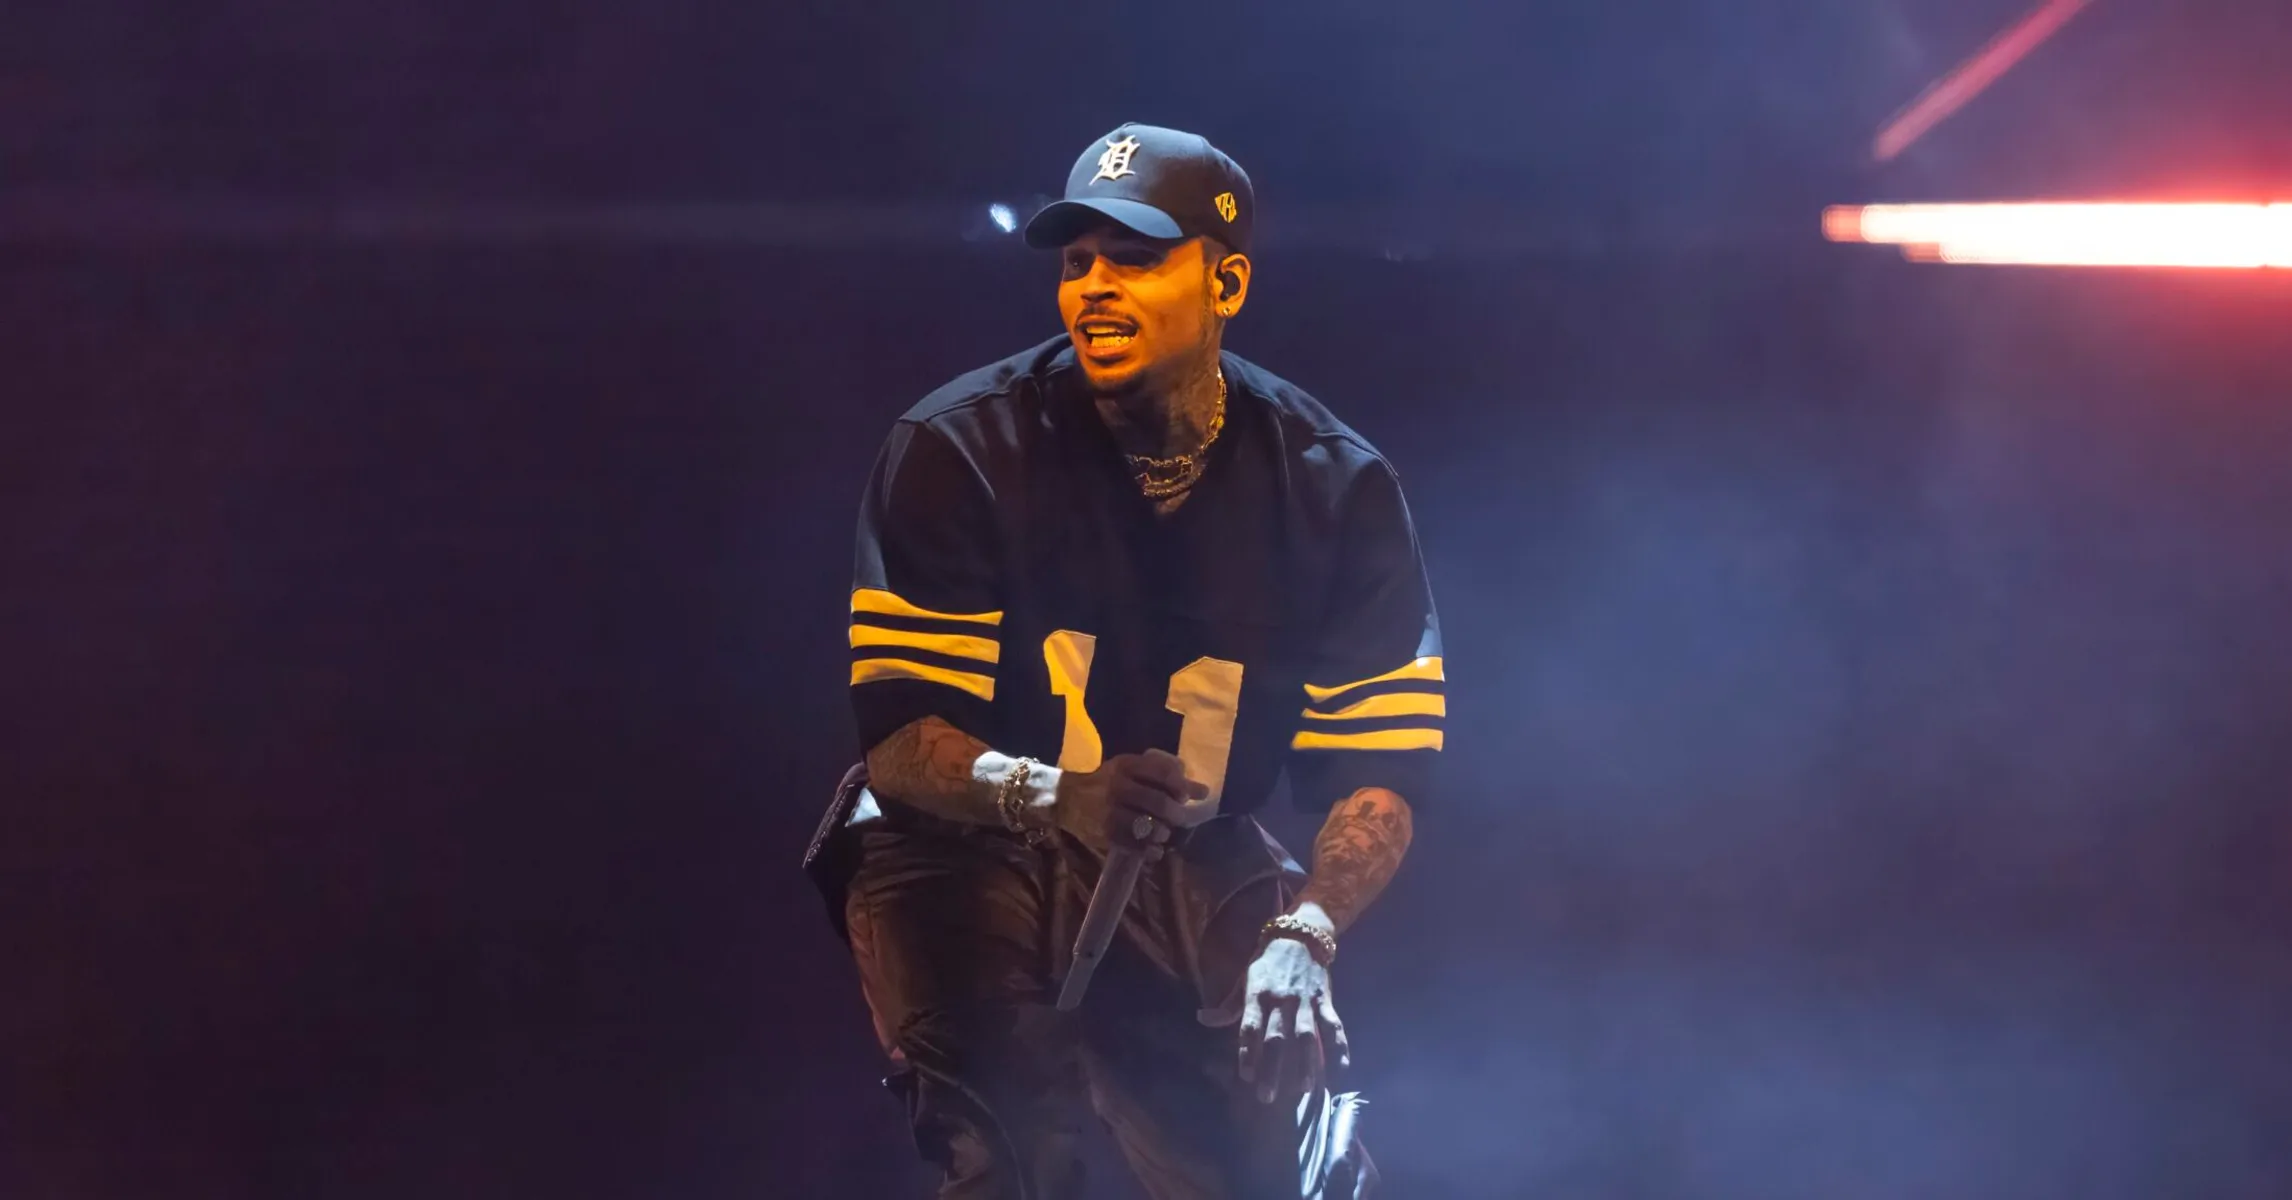 Chris Brown fan refutes viral rumor that he offered disabled meet & greet attendee ,000 and a refund